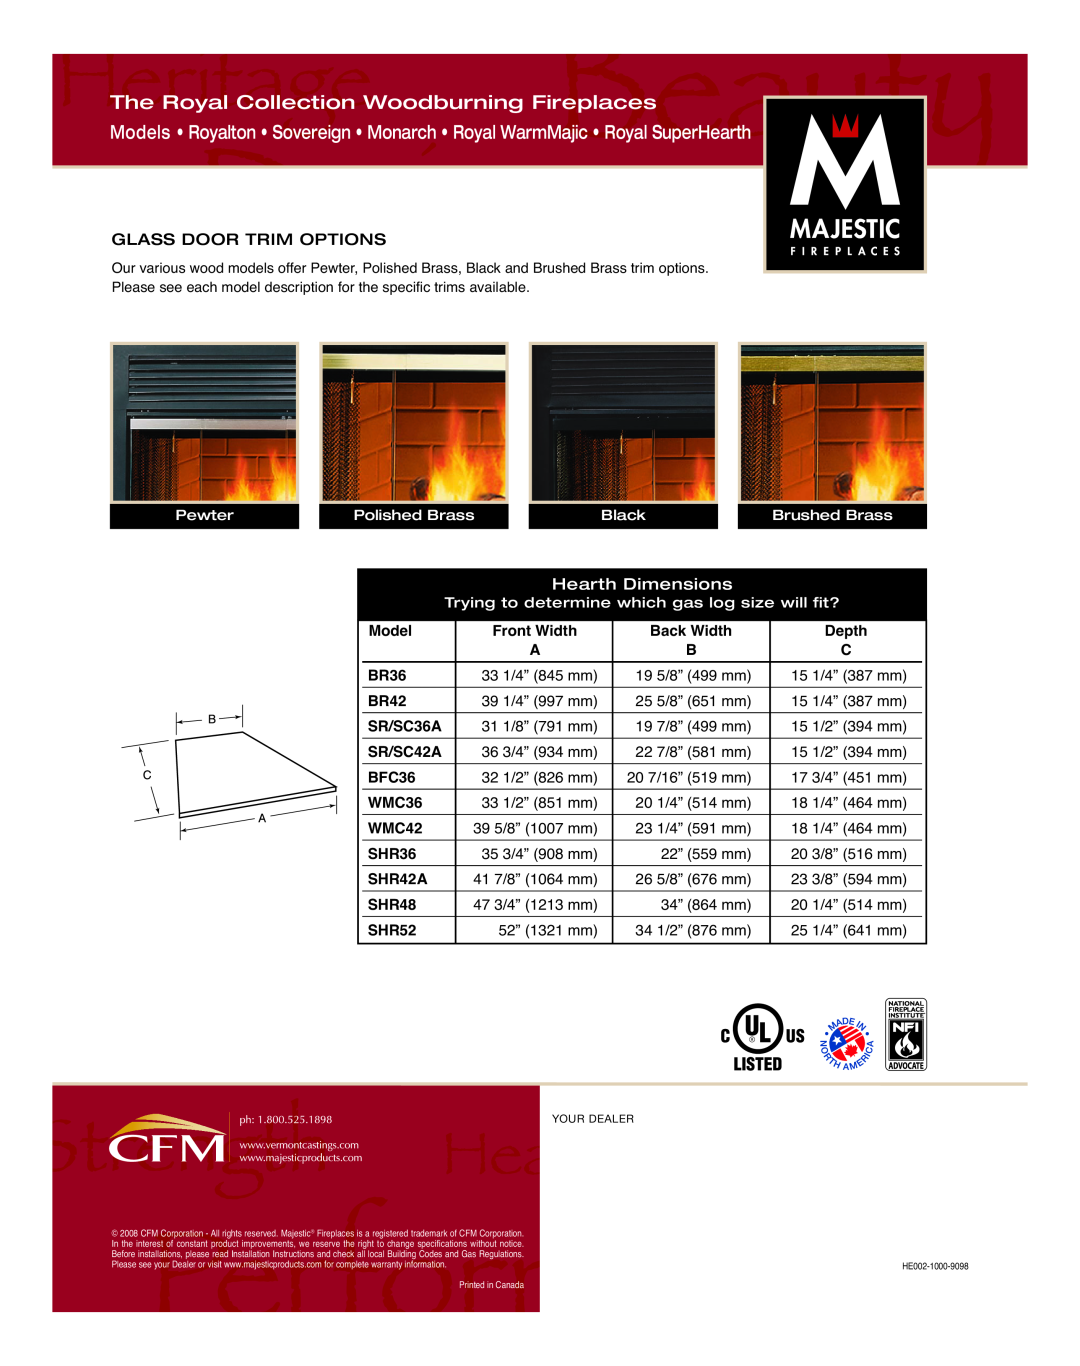 Vermont Casting WMC36 Hearth Dimensions, The Royal Collection Woodburning Fireplaces, Model, Front Width, Back Width, BR36 